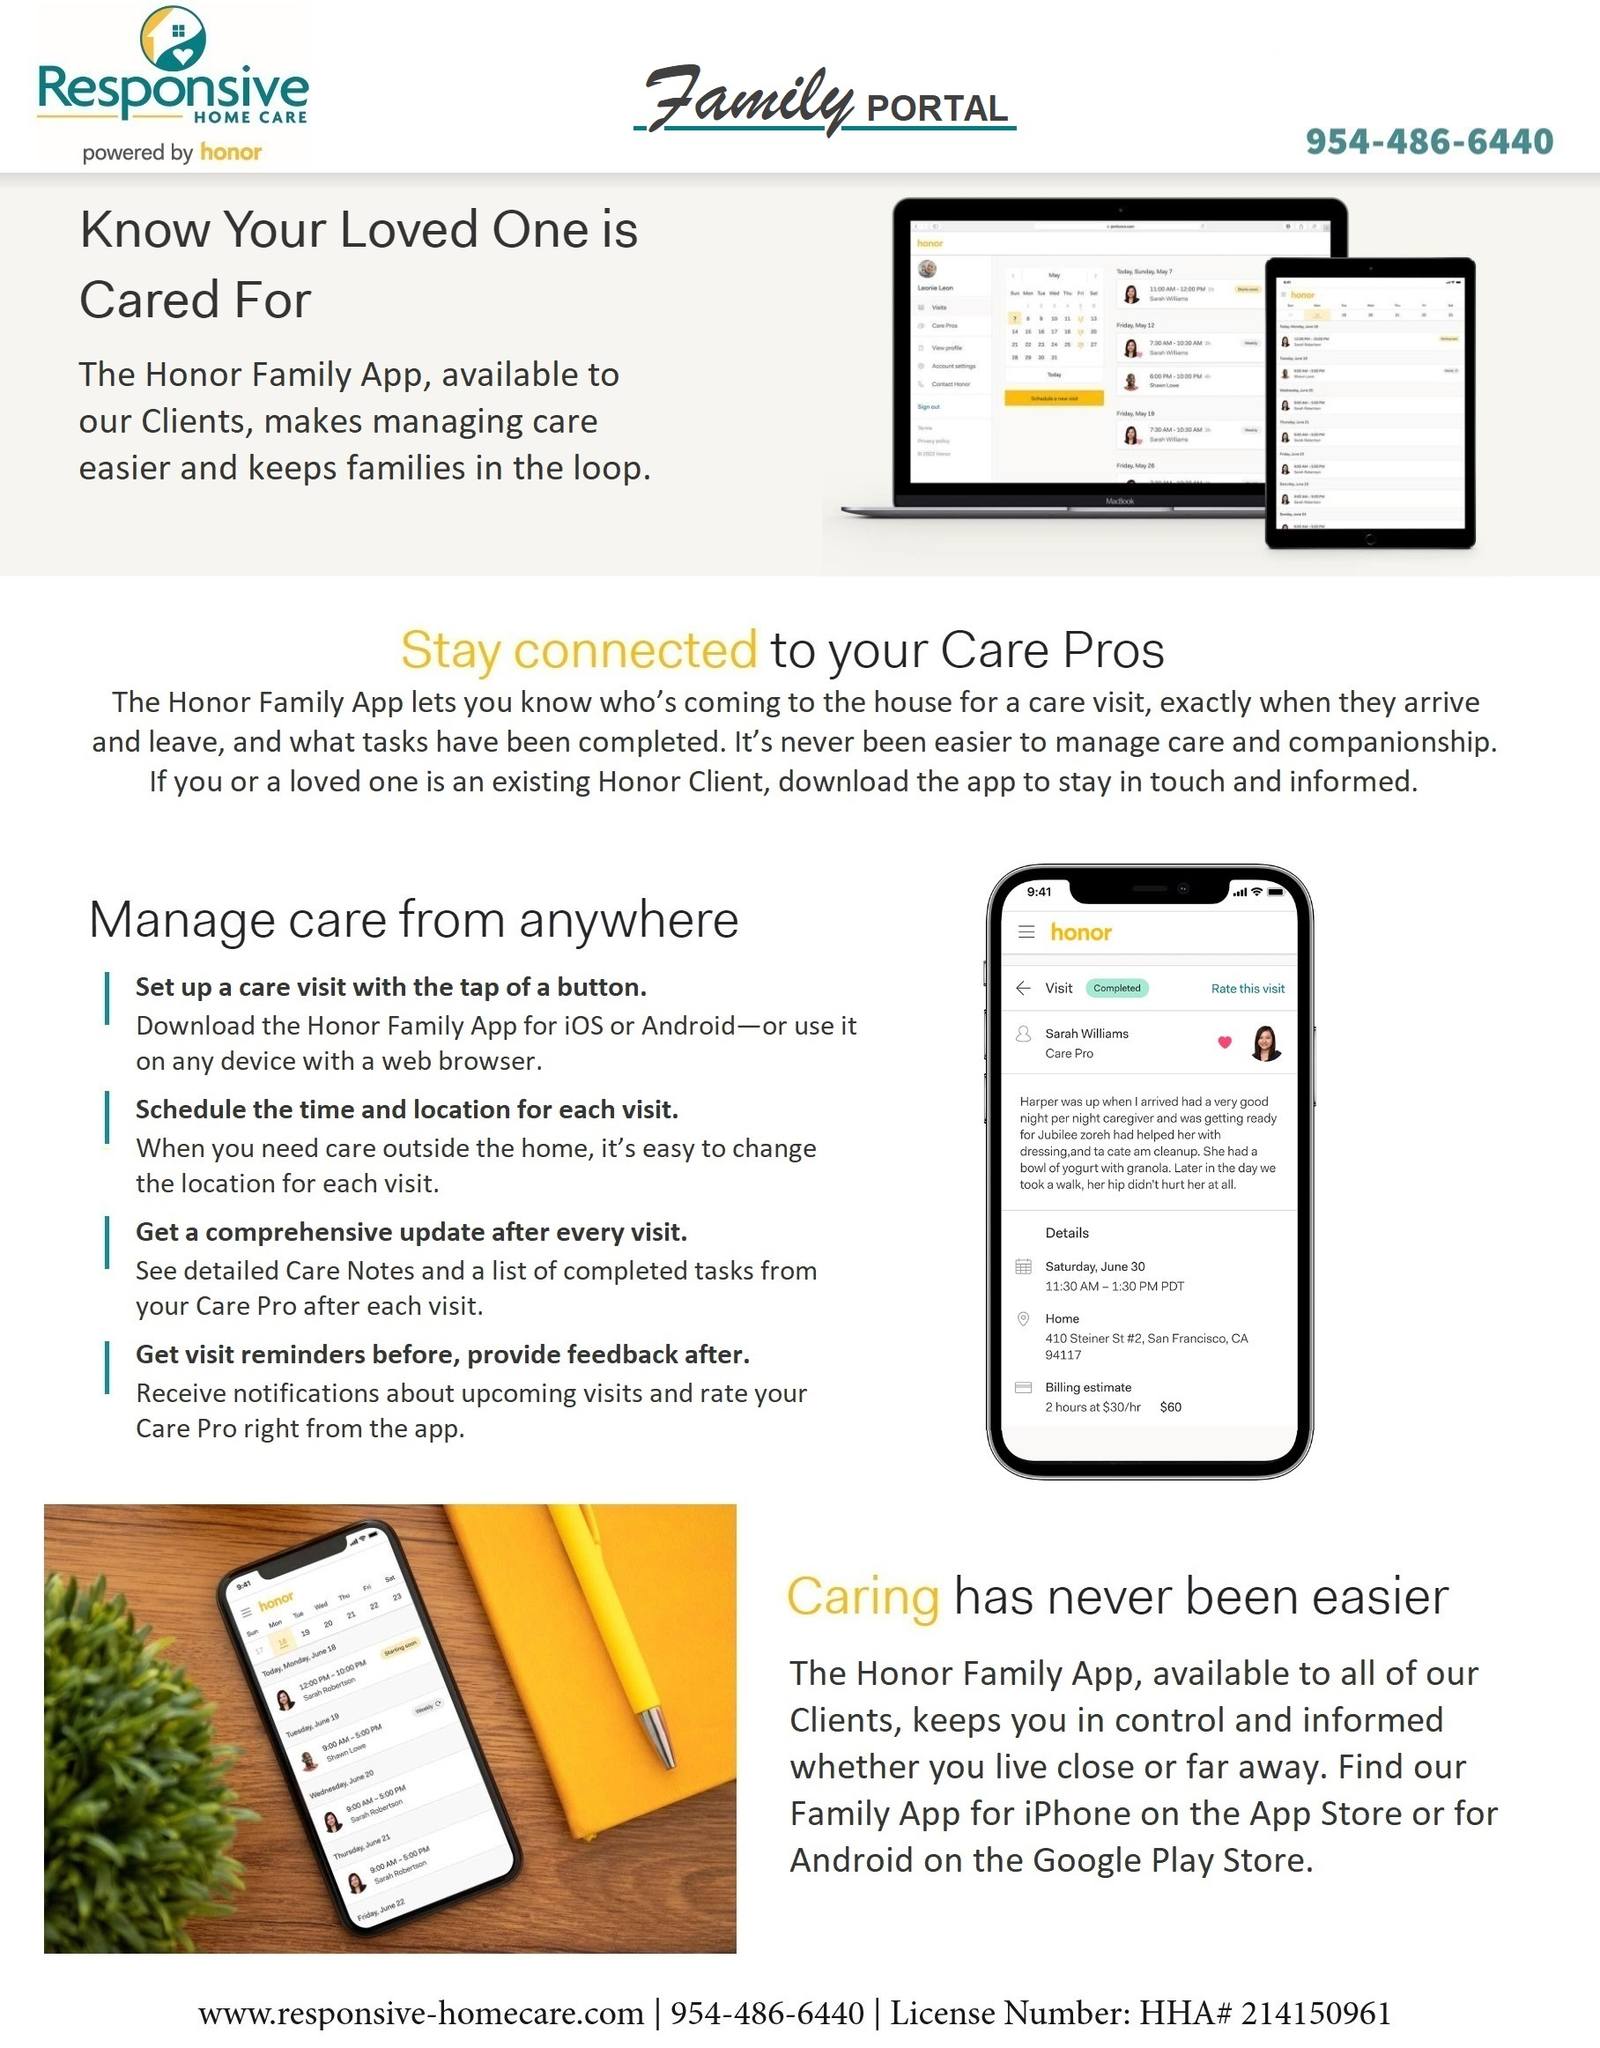 Family Portal - Know Your Loved One is Cared For - April 2023